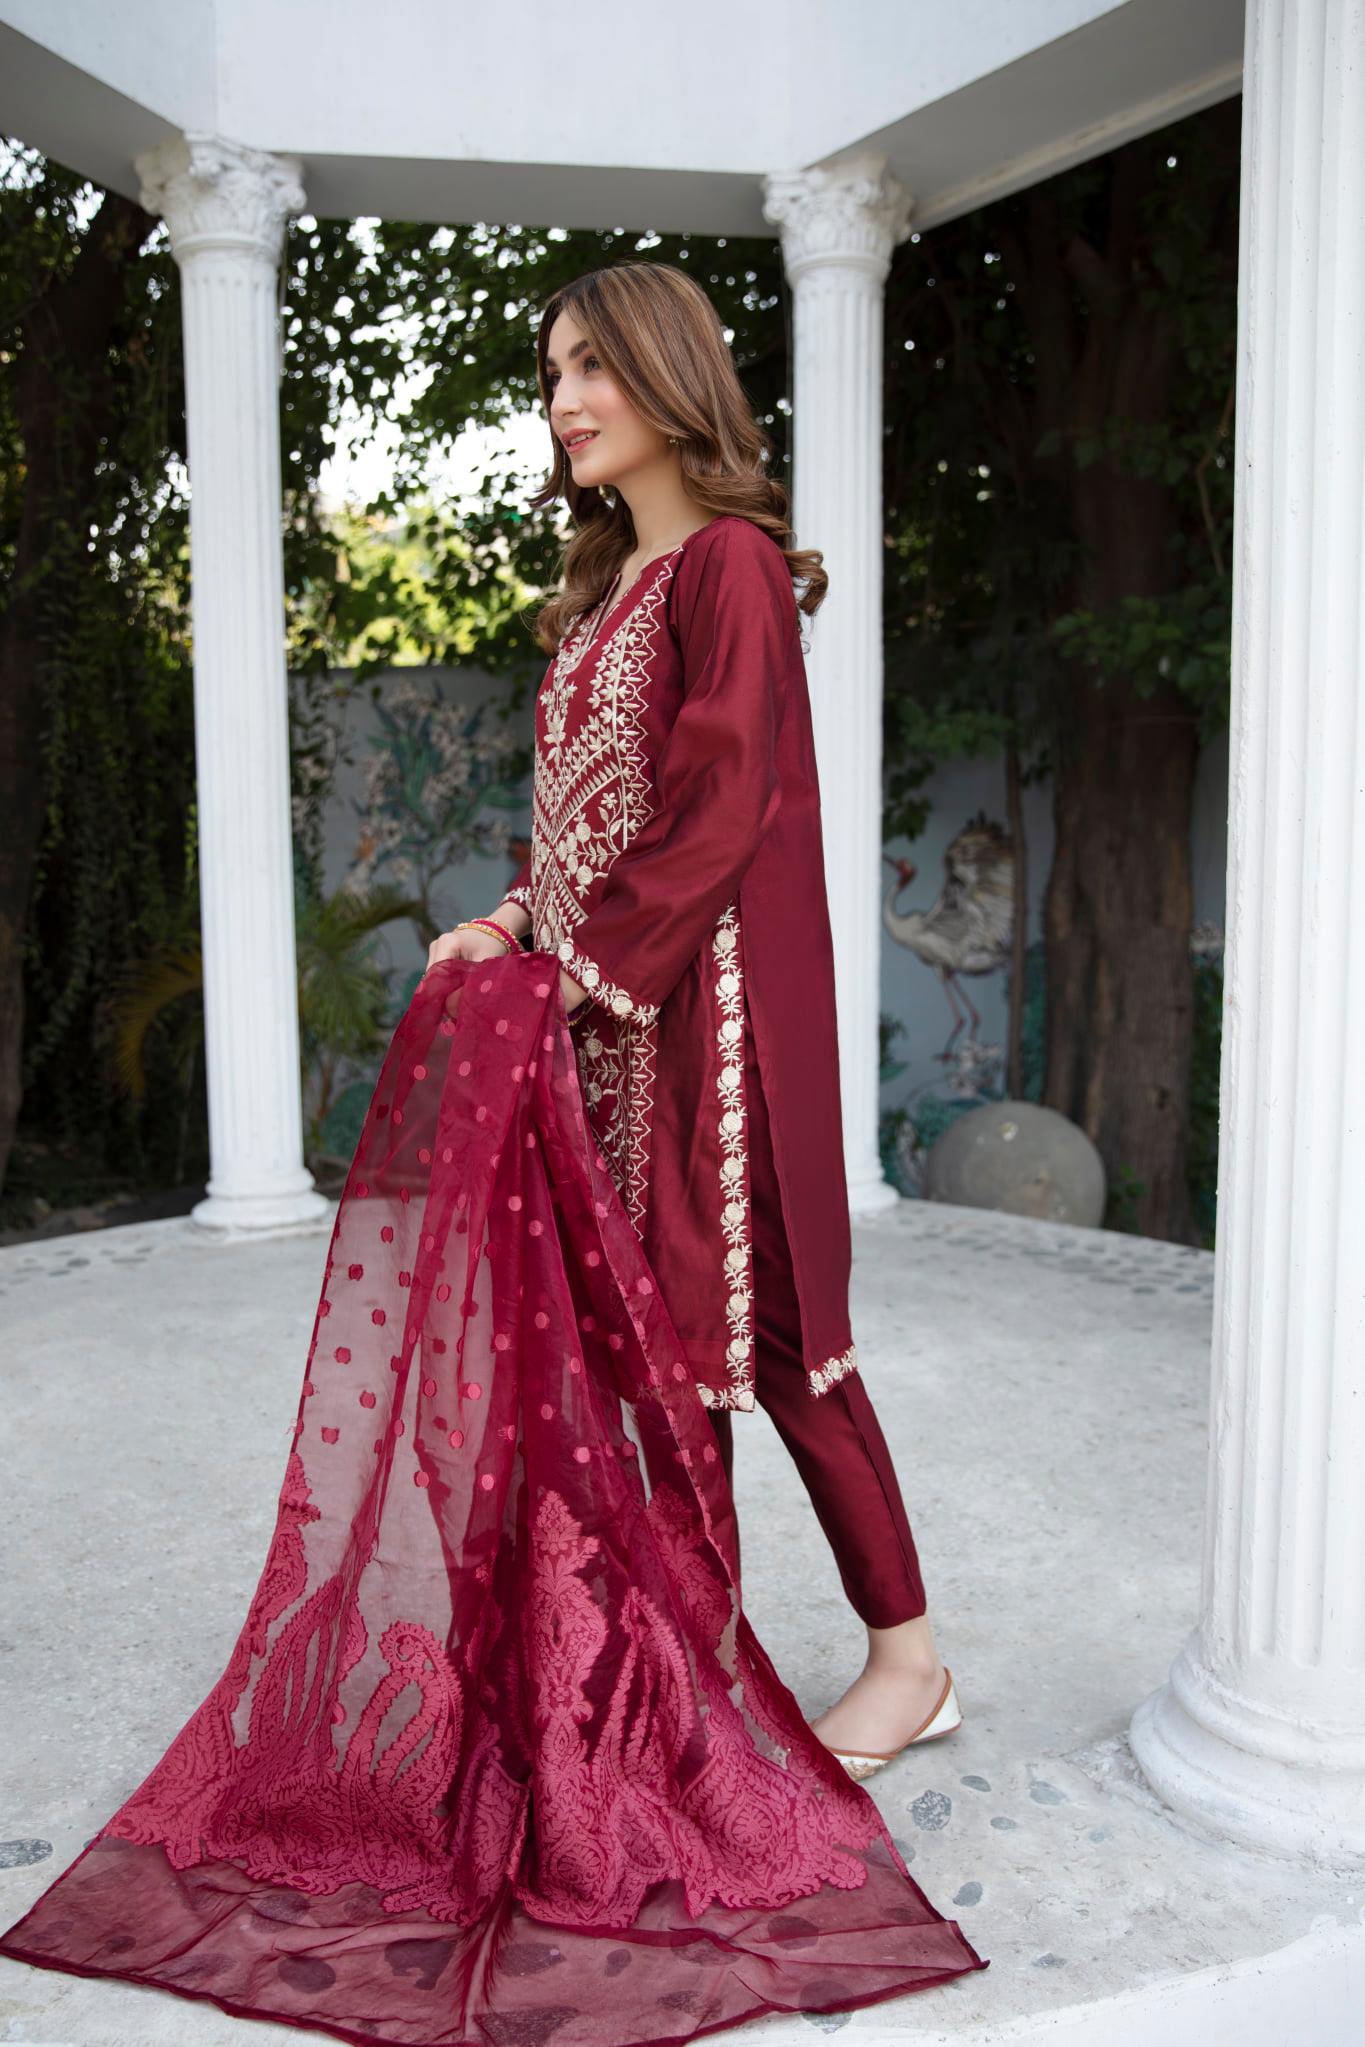 Rose Radiance Pakistani party wear gown outfit by aisha imran